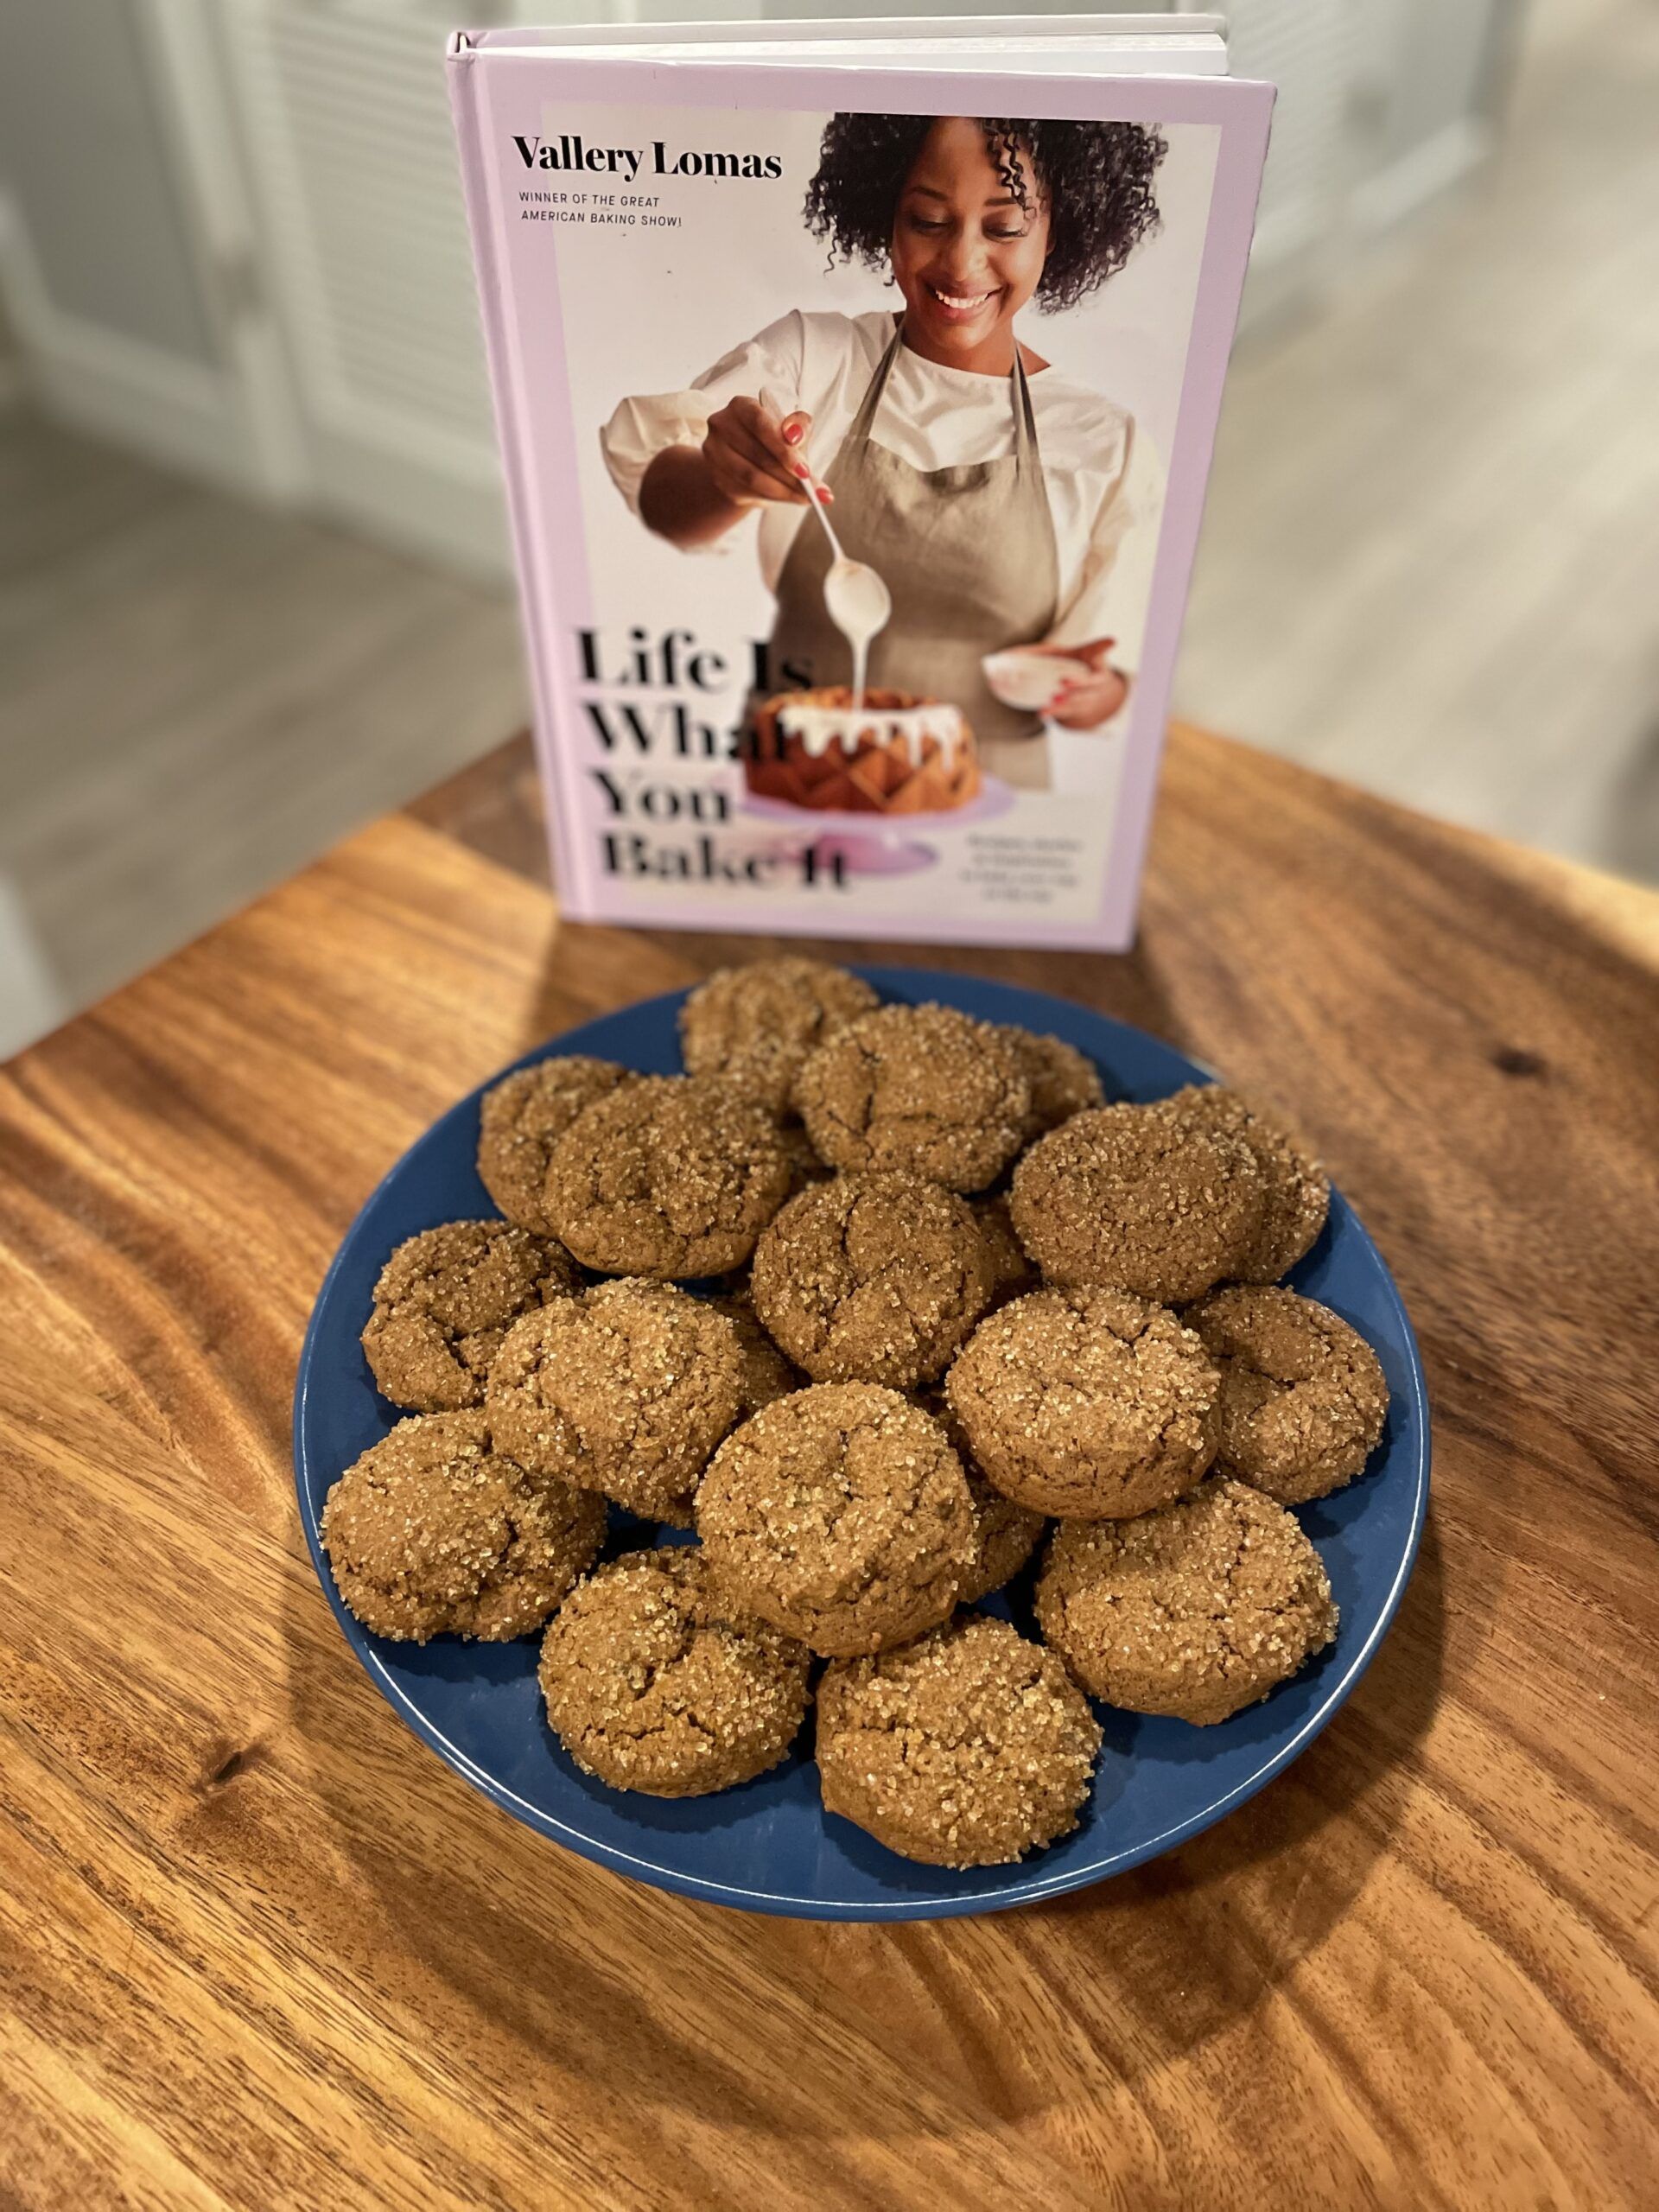 Thick gingerbread cookies covered in coarse sugar on a blue plate beside Vallery Lomas' cookbook Life Is What You Bake It